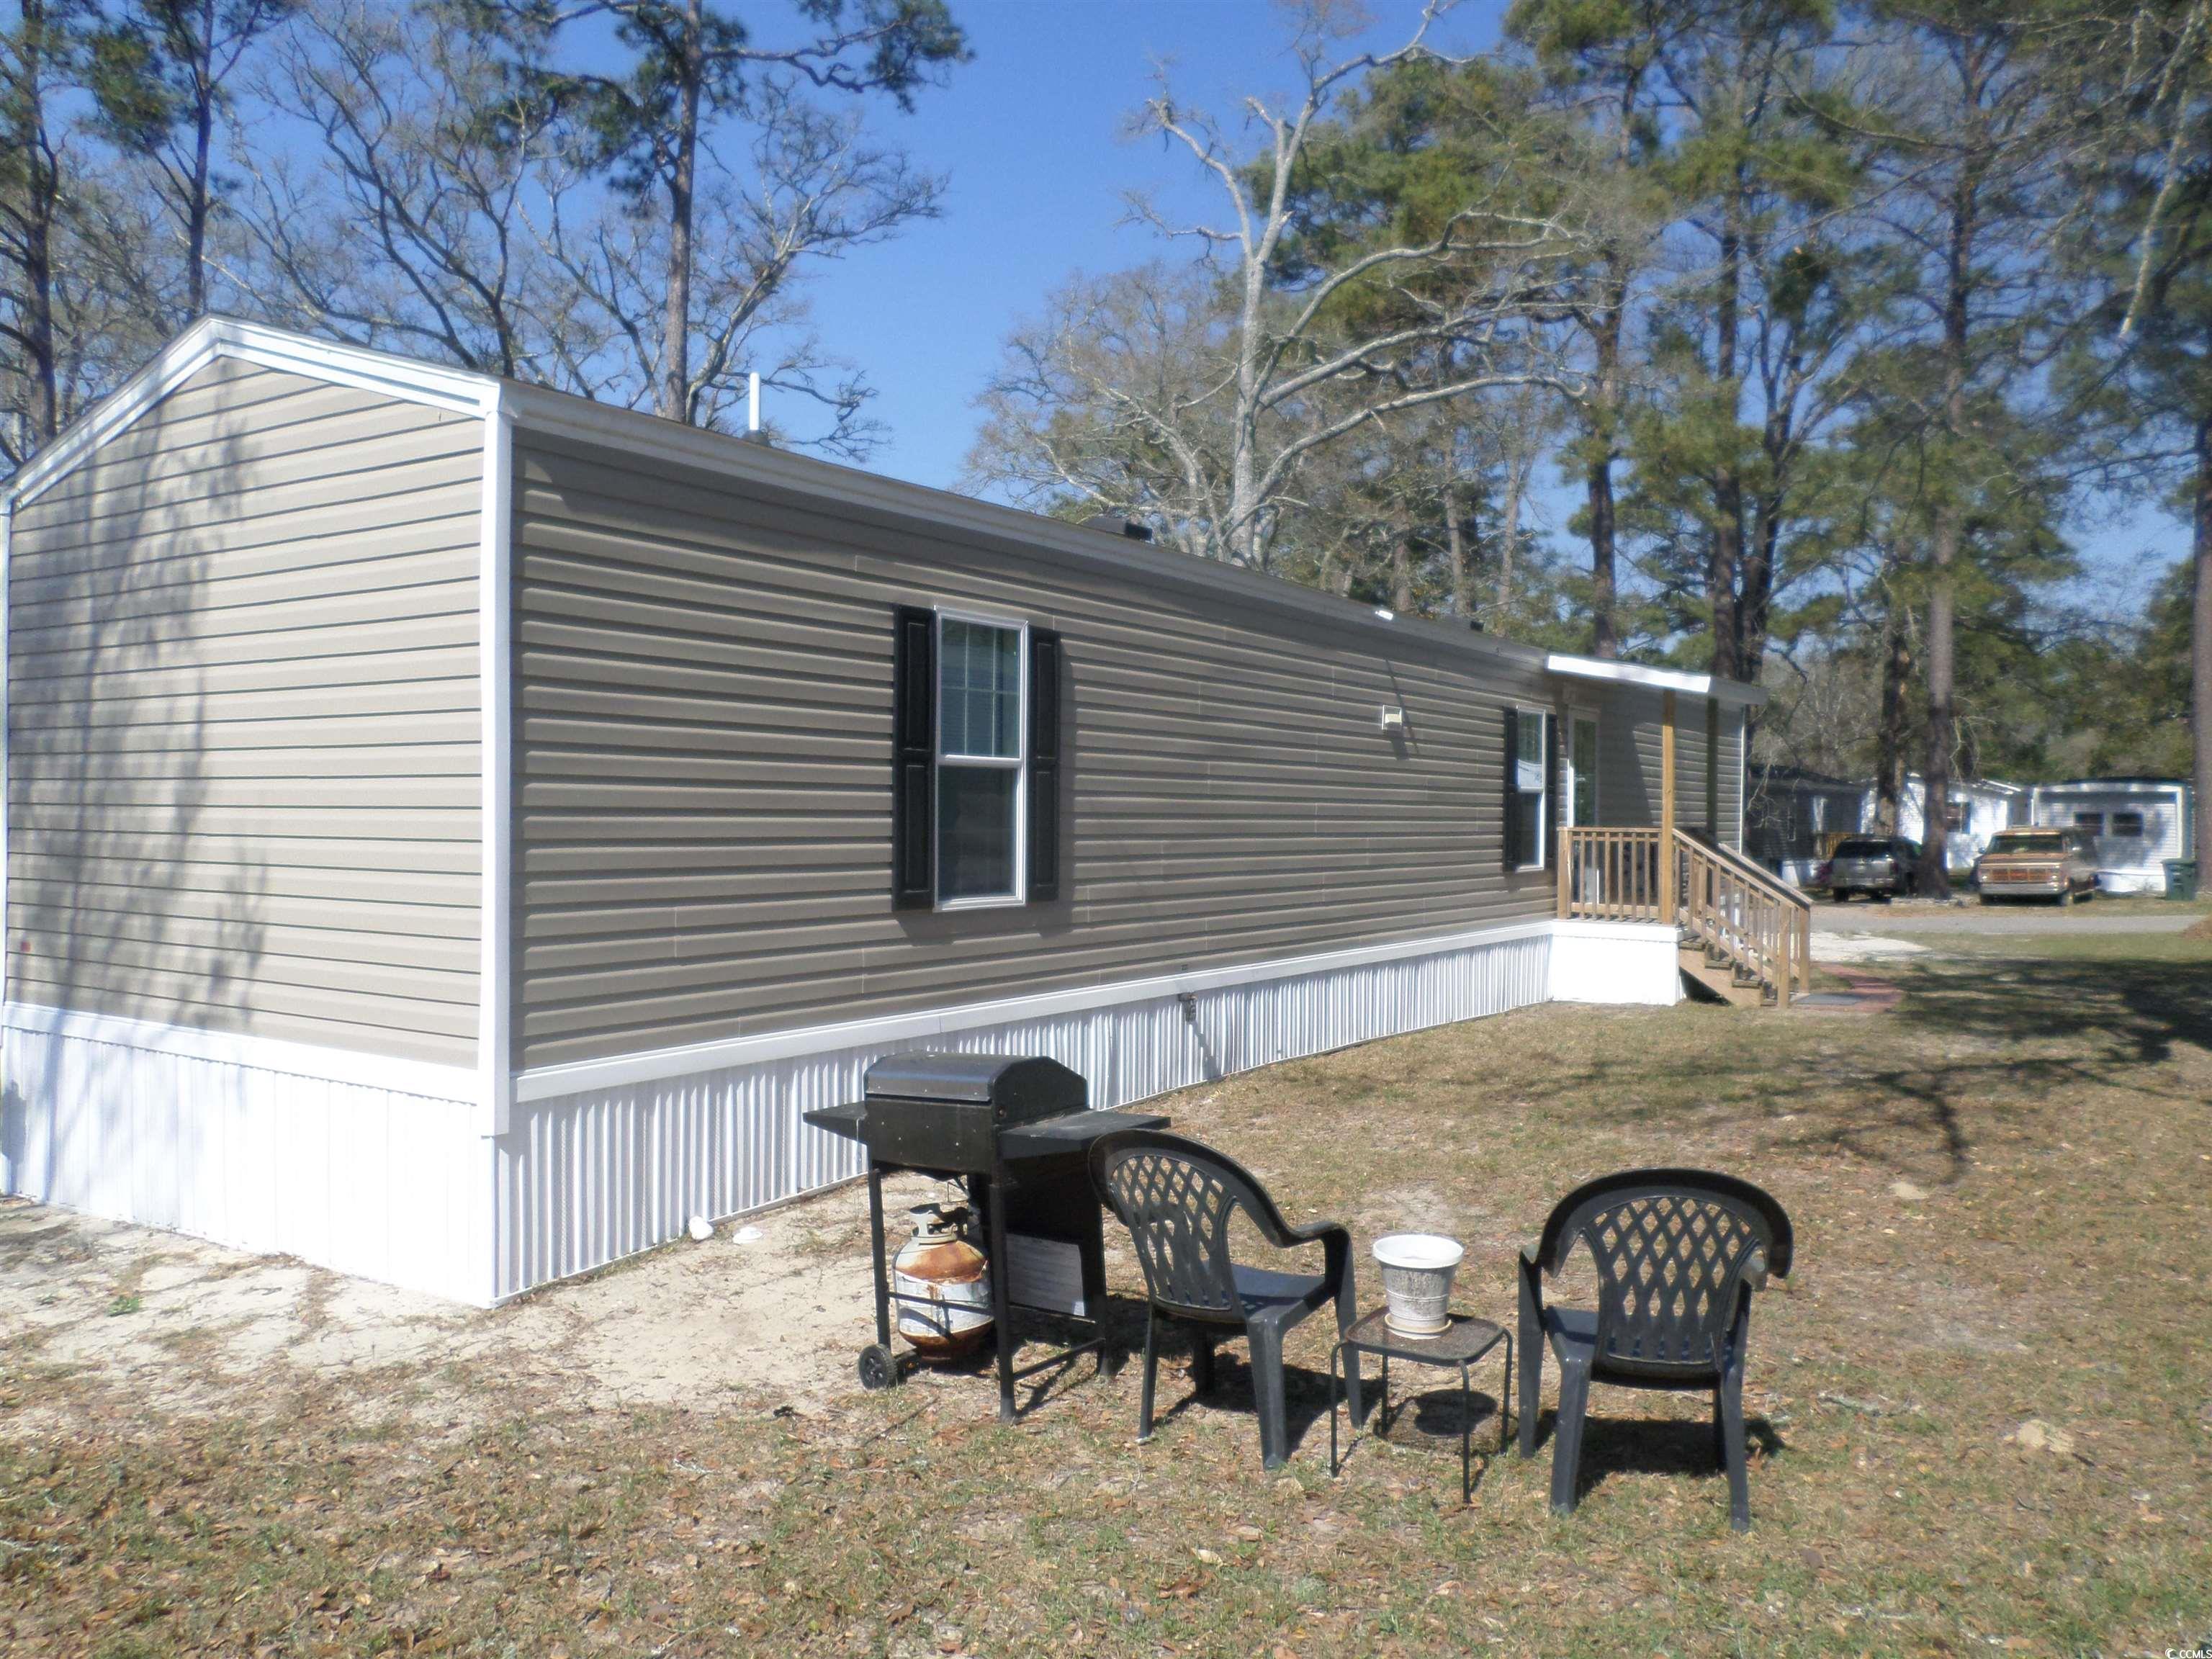 motivated sellers. price improvement!  beautiful 3 bedroom 2 bath 2022 scotbuilt manufactured home is set up in the sought after leased land community of creekside mhp in north myrtle beach, sc.  the home has an appliance package to include range, microwave, dishwasher, and refrigerator.  the master bedroom is located on one end of the home while the second and third bedrooms are constructed on the front end of the home.  both bathrooms have tub shower combinations and vanities. the vinyl flooring flows nicely throughout the home and is easily maintained.  the open floor plan is great for entertaining while cooking and dining.  the neutral color tones will mix and match with any furniture or decor.   the lovely ceiling fans offer additional elegance and cooling throughout the home.    the two wooden 4' x 6" decks are easy accesses to the front and rear entries of the home.   an additional roof top deck cover was added to the home for weather sheltering and curb appeal. this lovely property would make a fine permanent residence or vacation home.   creekside community boasts a swimming pool, onsite mail boxes, playground area and views of the marsh down by the clubhouse.  pets, golf carts, motorcycles are welcome with community approval. fences and a storage building may be added to the property with community approval as well. land lease is paid until 1/1/25.  call for more details and to schedule your private viewing today.  a must see.